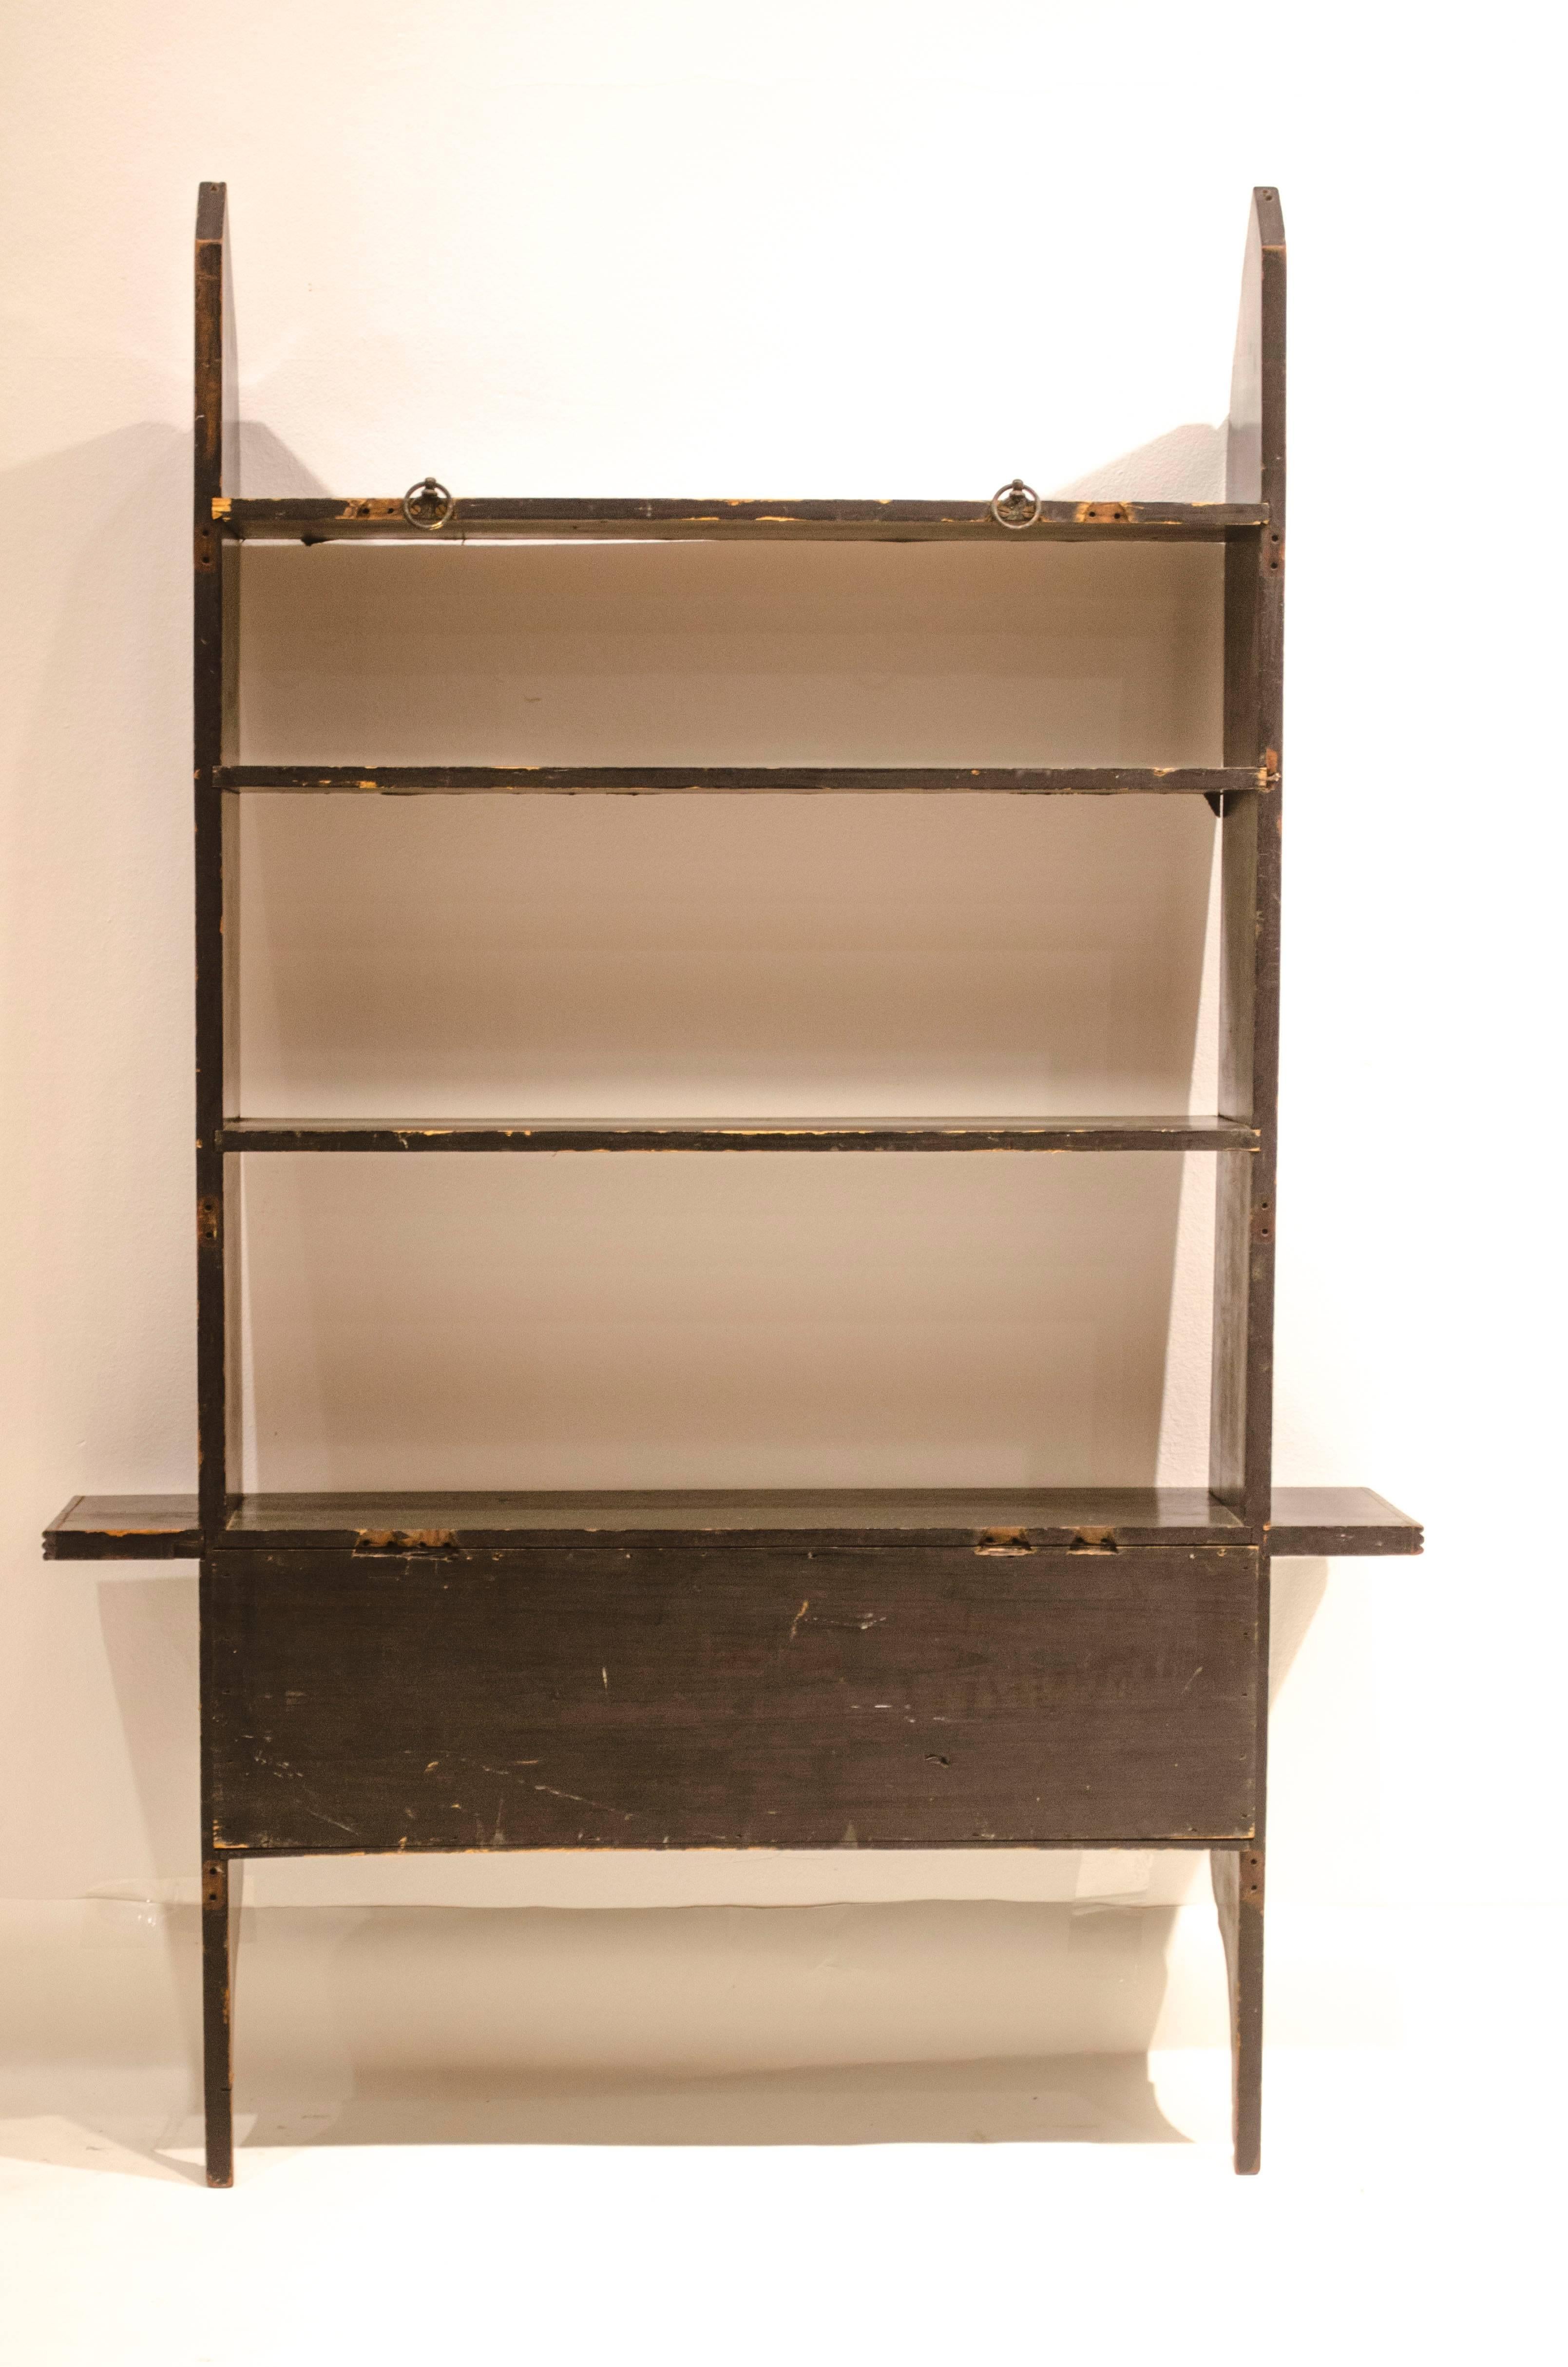 Great Britain (UK) Rare Set of Anglo-Japanese Ebonised Hanging Book Shelves by E W Godwin For Sale